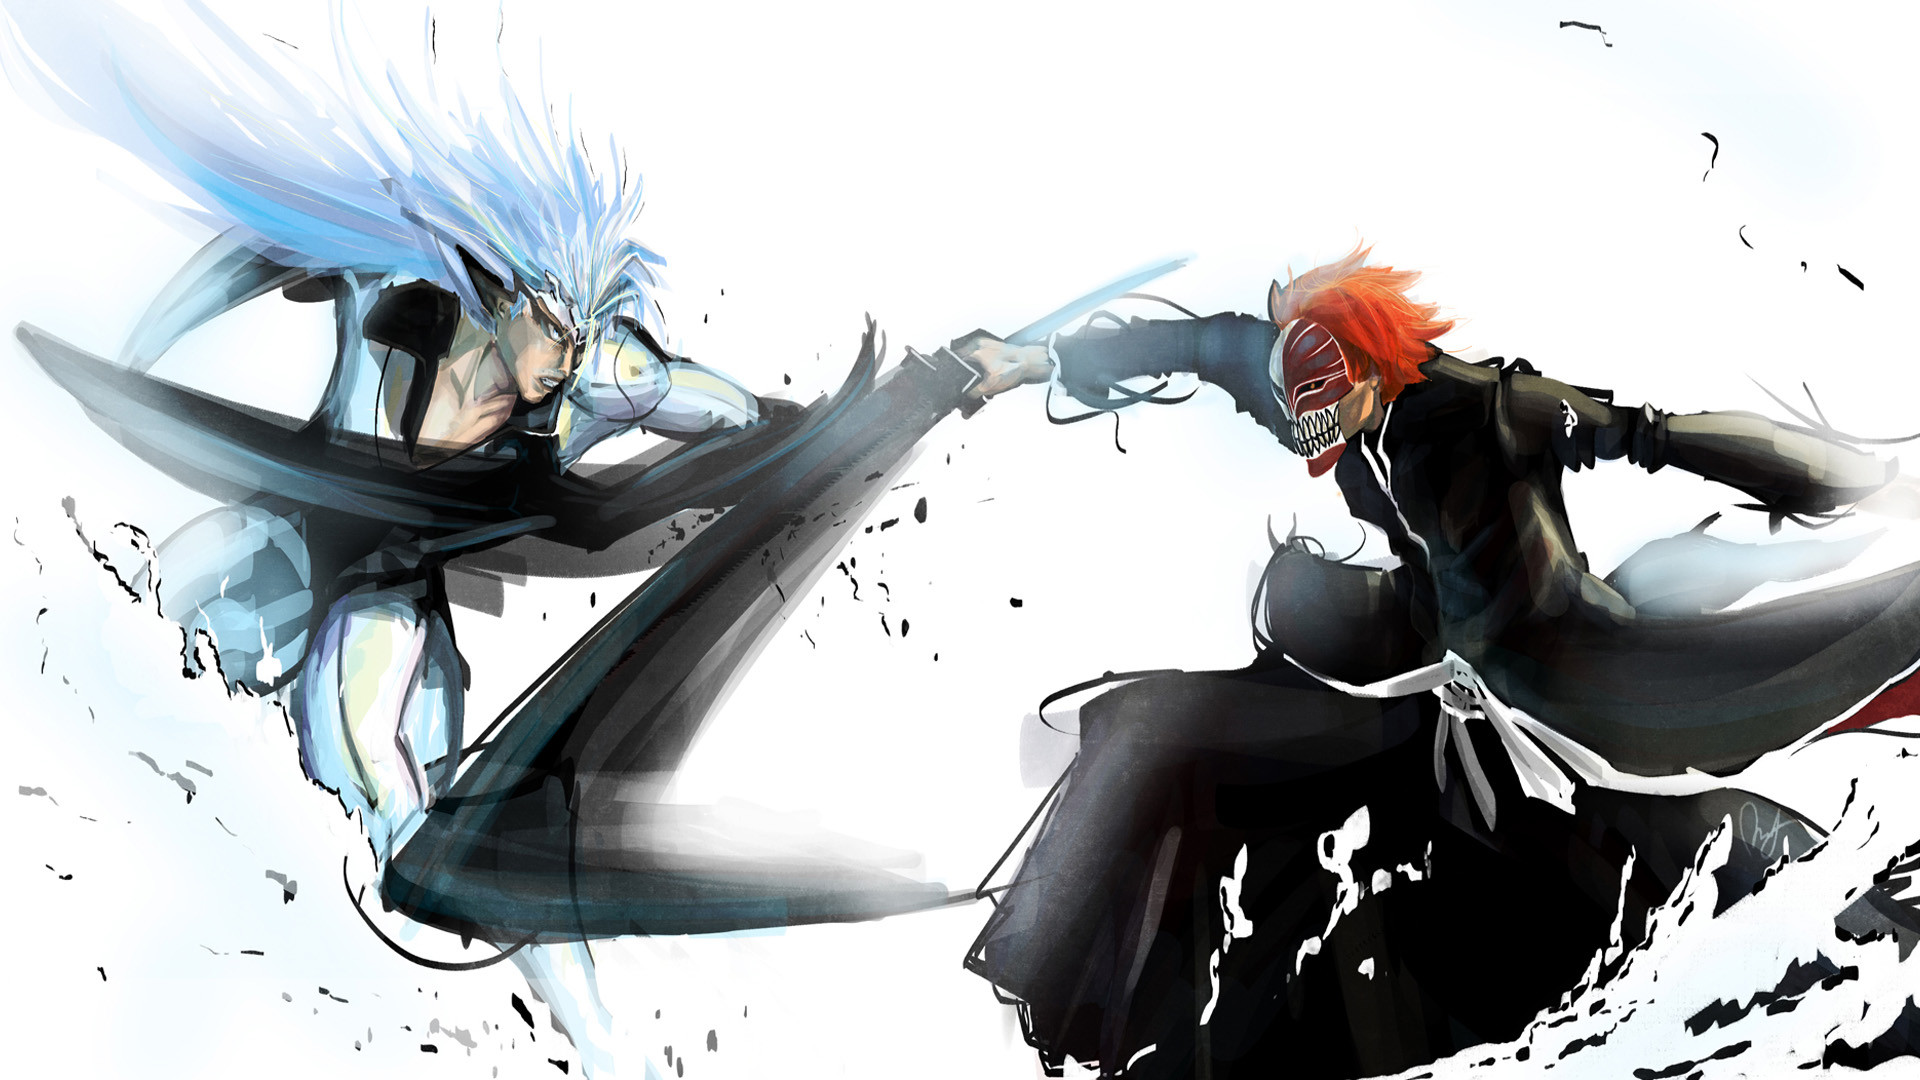 1920x1080 352 Grimmjow Jaegerjaquez HD Wallpapers | Backgrounds - Wallpaper Abyss -  Page 5